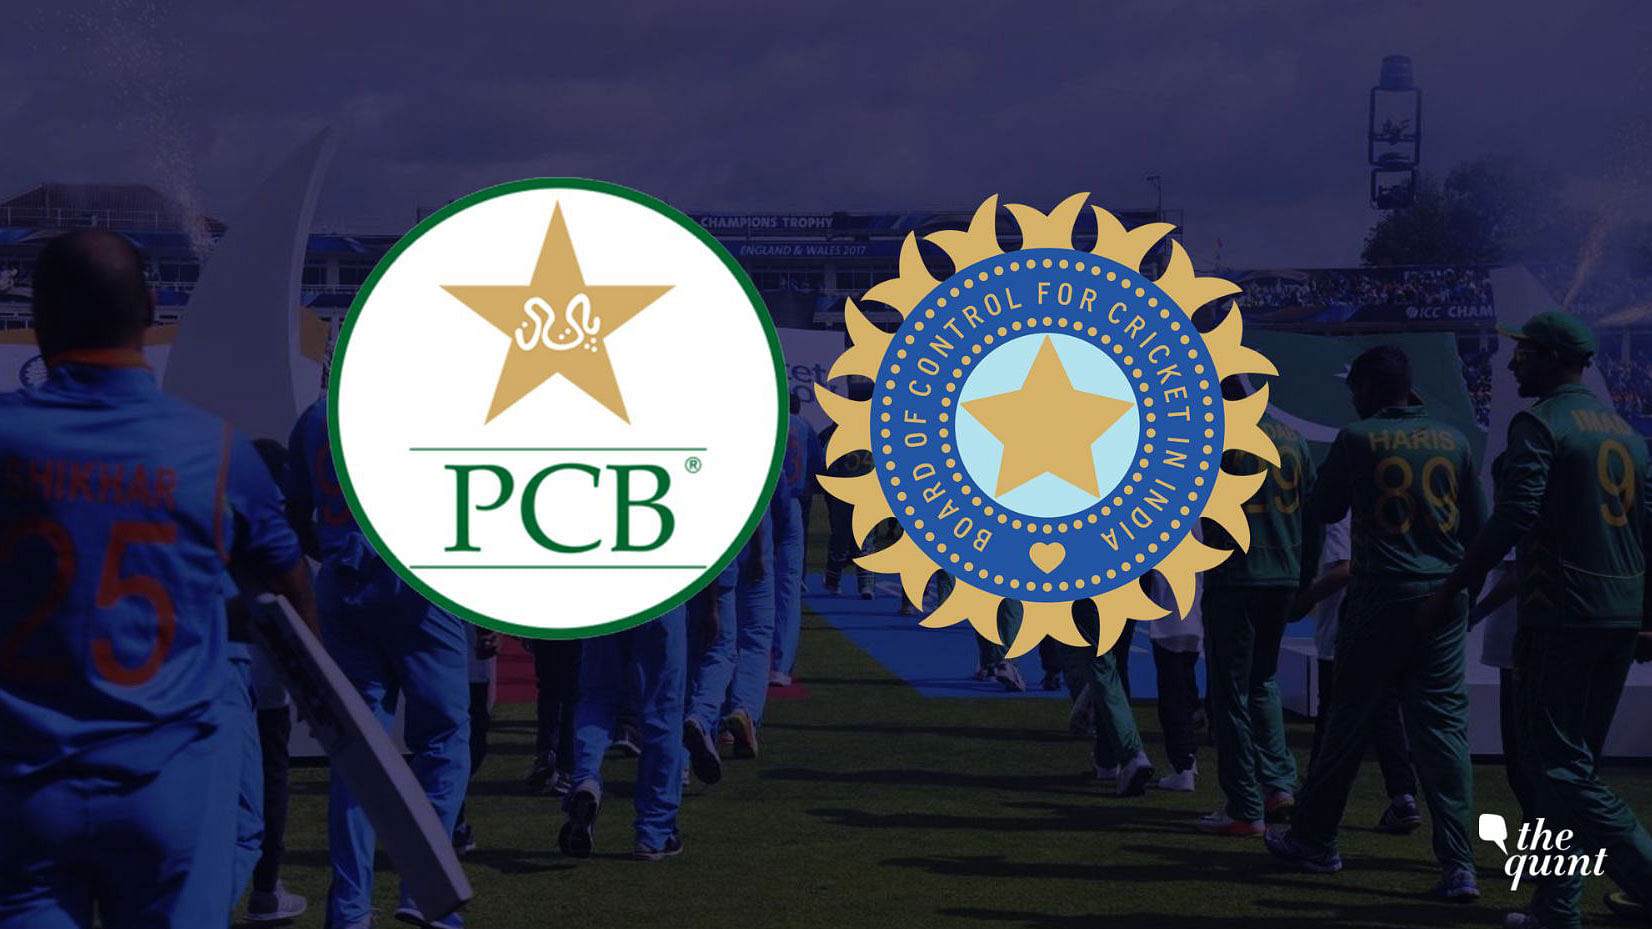 Barely a week after competing on the 22 yards, the bitter Indo-Pak rivalry resumed albeit on a different ‘pitch’ where ICC’s Dispute Resolution Forum heard PCB’s USD 70 million compensation claim against BCCI.